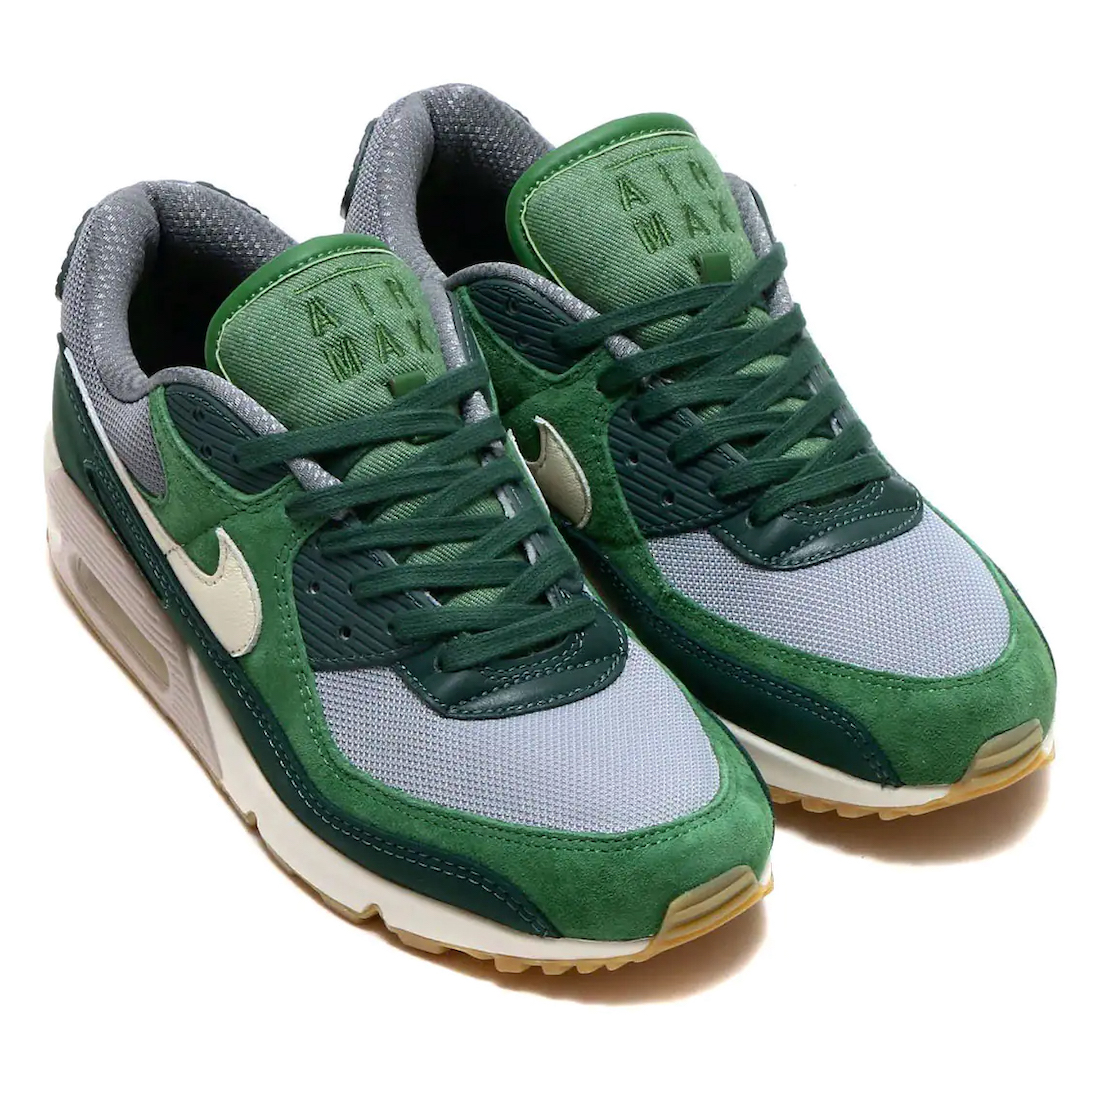 Nike Air Max 90 Pro Green Pale Ivory Forest Green DH4621-300 Release Date